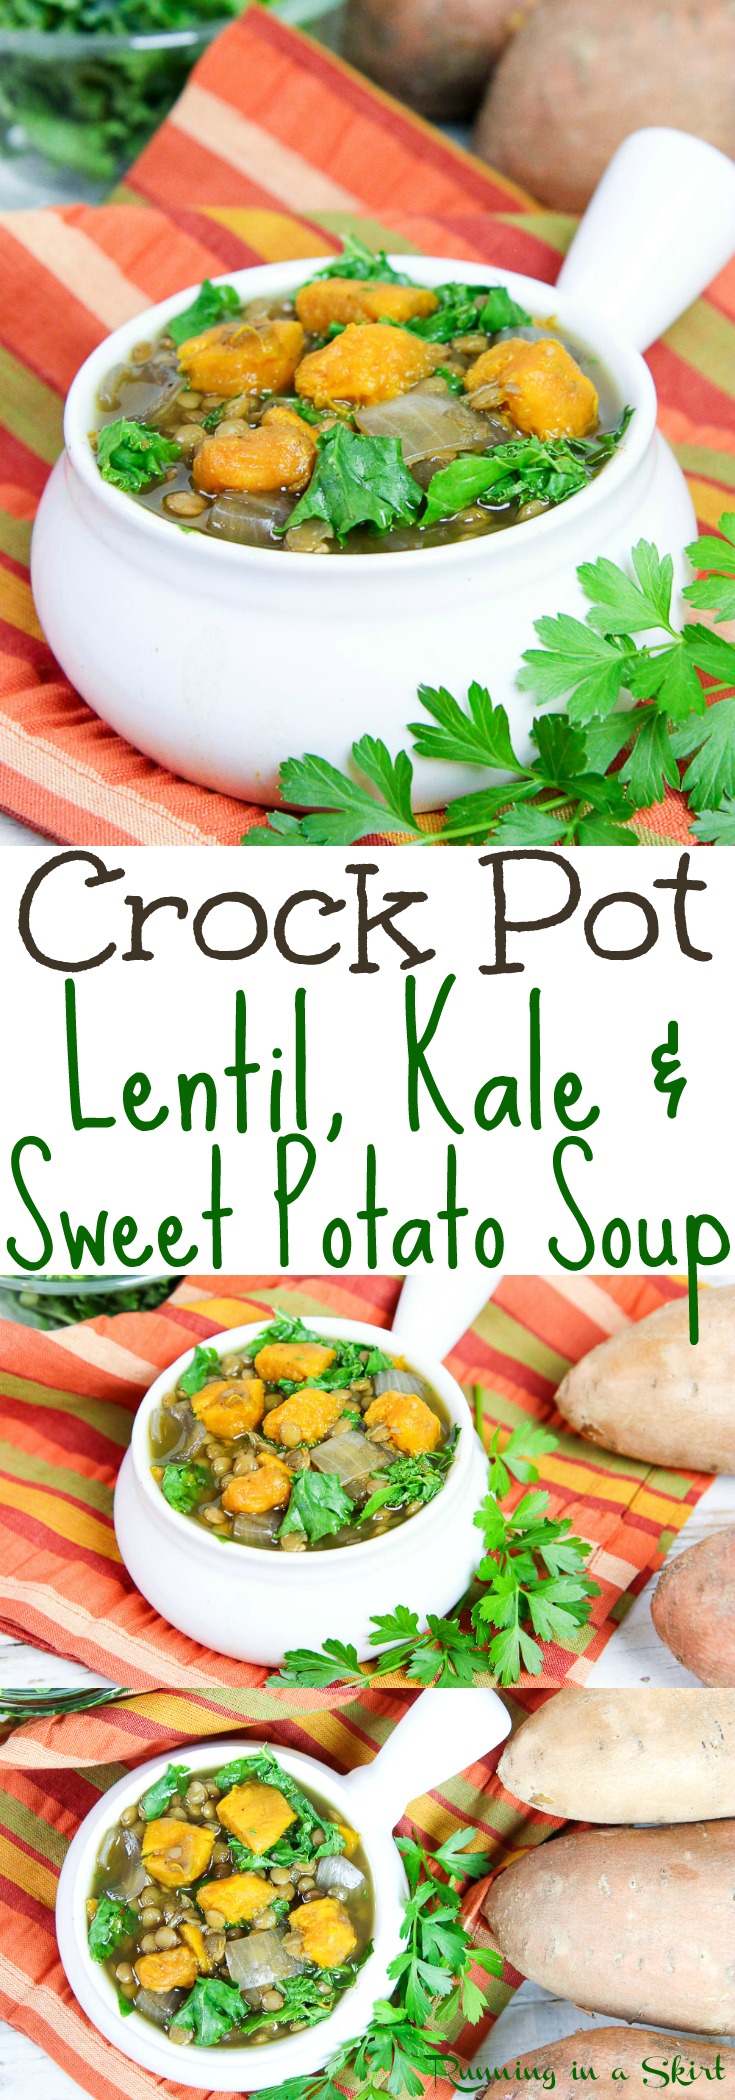 Crock Pot Lentil Sweet Potato Soup recipe- a perfect healthy & simple meal for the slow cooker. Packed with other veggies like kale... perfect food for families. Look no further for tasty vegan recipes! / Running in a Skirt via @juliewunder